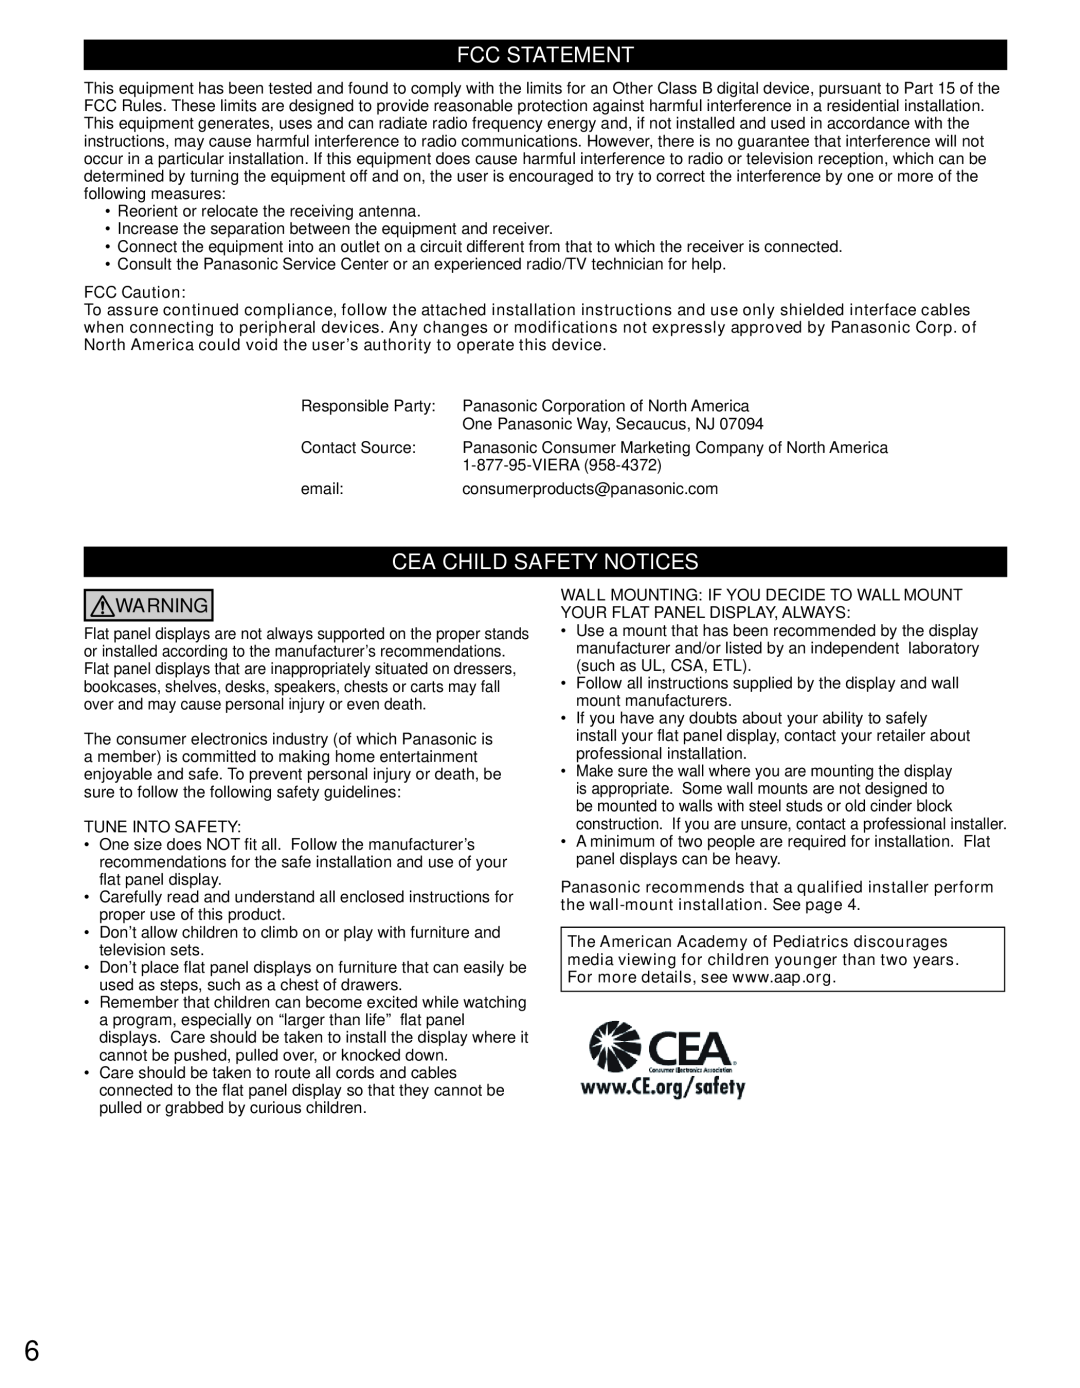 Panasonic TC-P50U50 owner manual Fcc Statement, Cea Child Safety Notices, FCC Caution, Tune Into Safety 